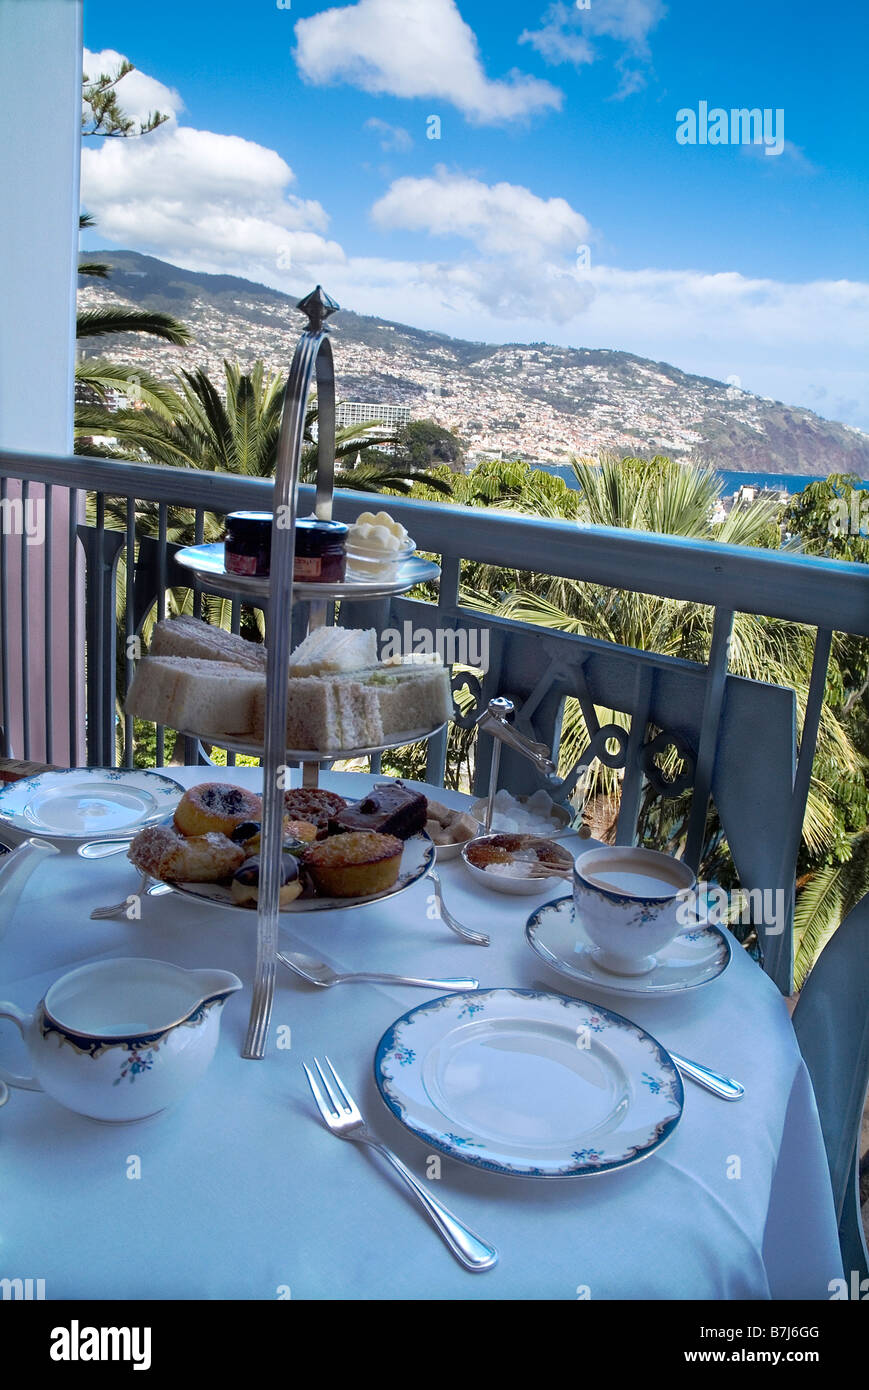 dh Reids Hotel hightea FUNCHAL HOTELS MADEIRA PORTUGAL Afternoon high tea table setting cakes food on balcony sandwiches with cake Stock Photo